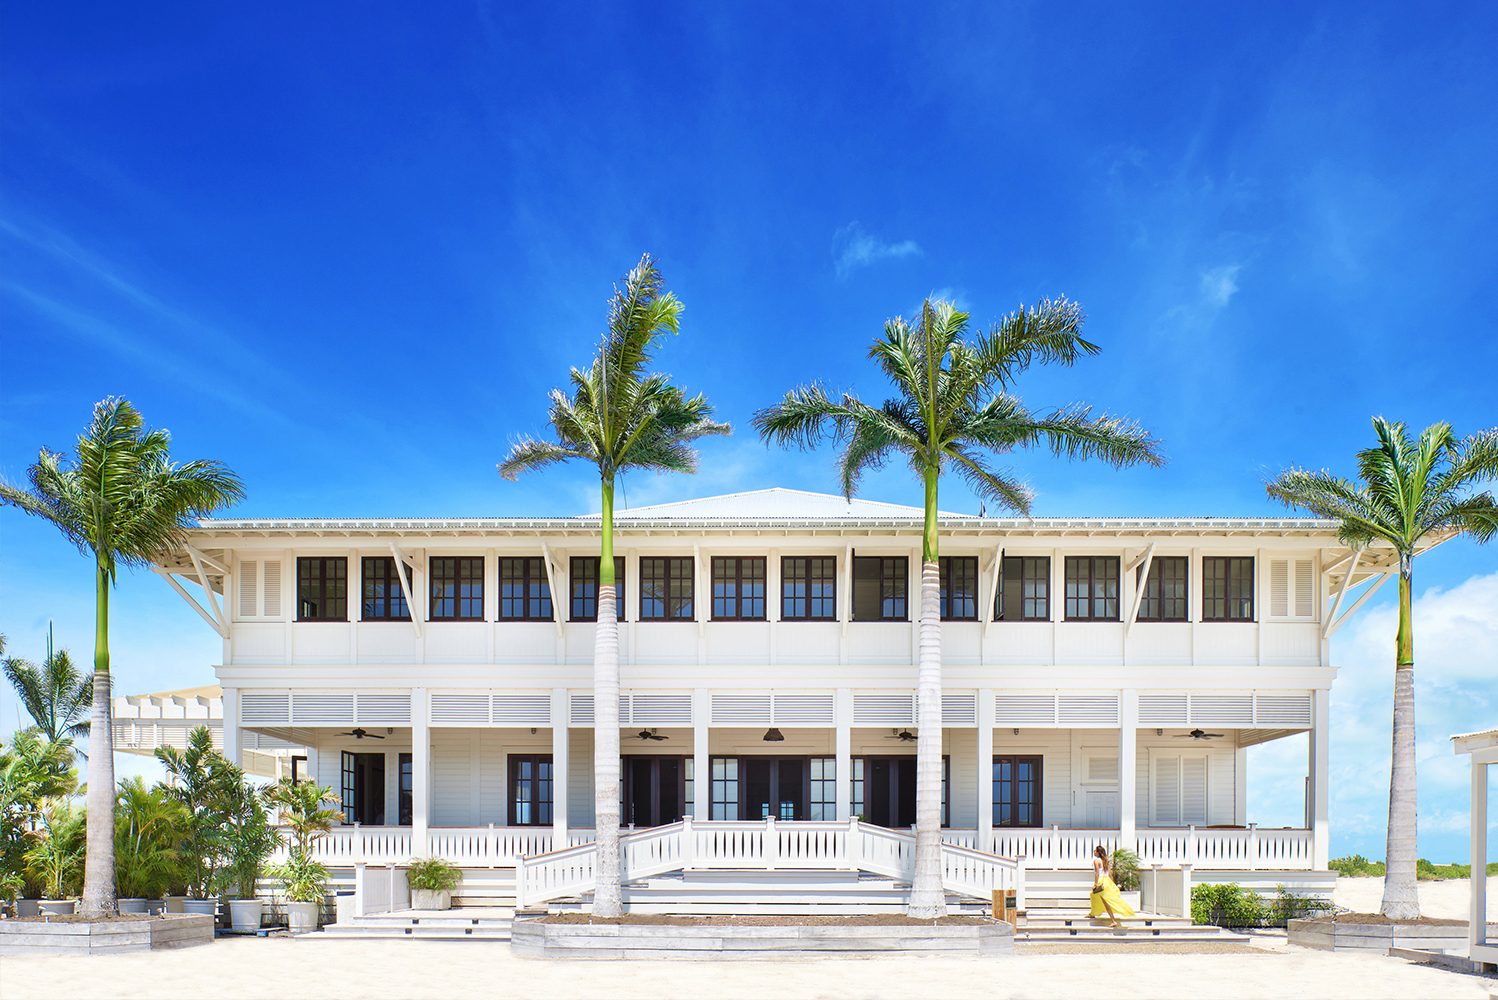 Mahogany Bay Resort  Beach Club Curio Collection by Hilton opened in Ambergris Caye as Hiltons first property in Belize